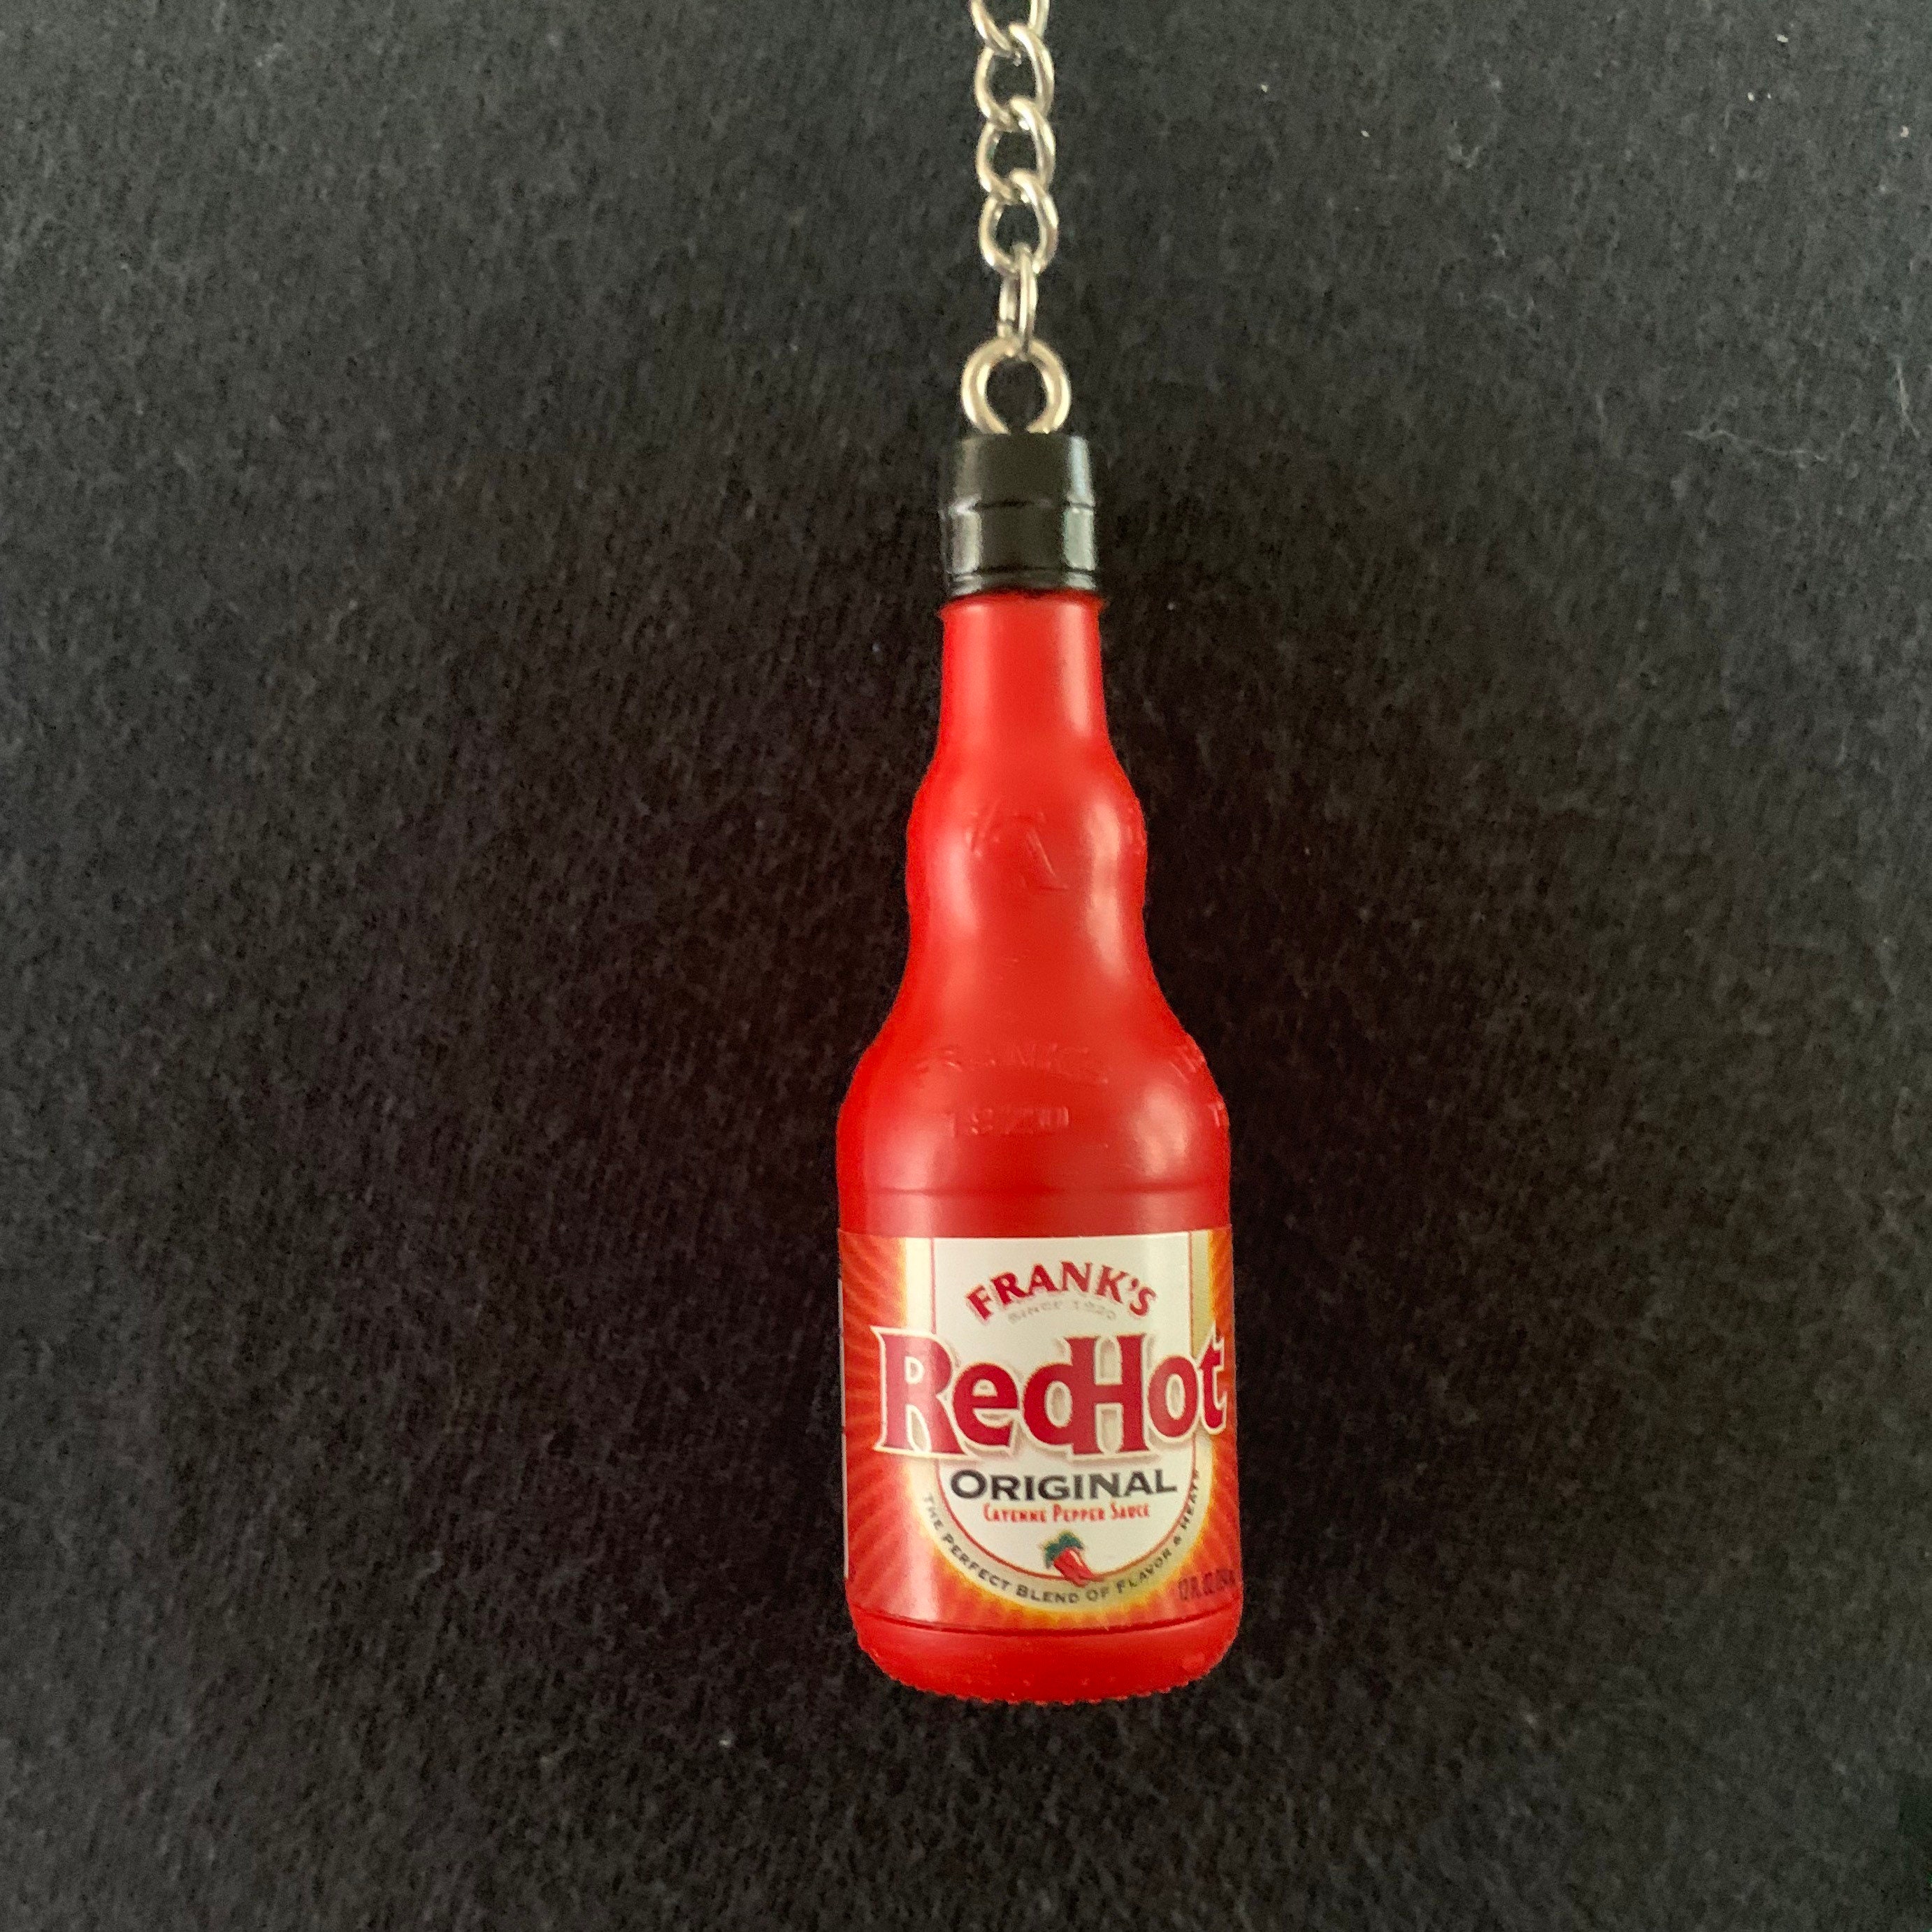 Fifty Shades Of Heat Hot Sauce With Handcuffs Key Chain - 5 Ounce Bottle 